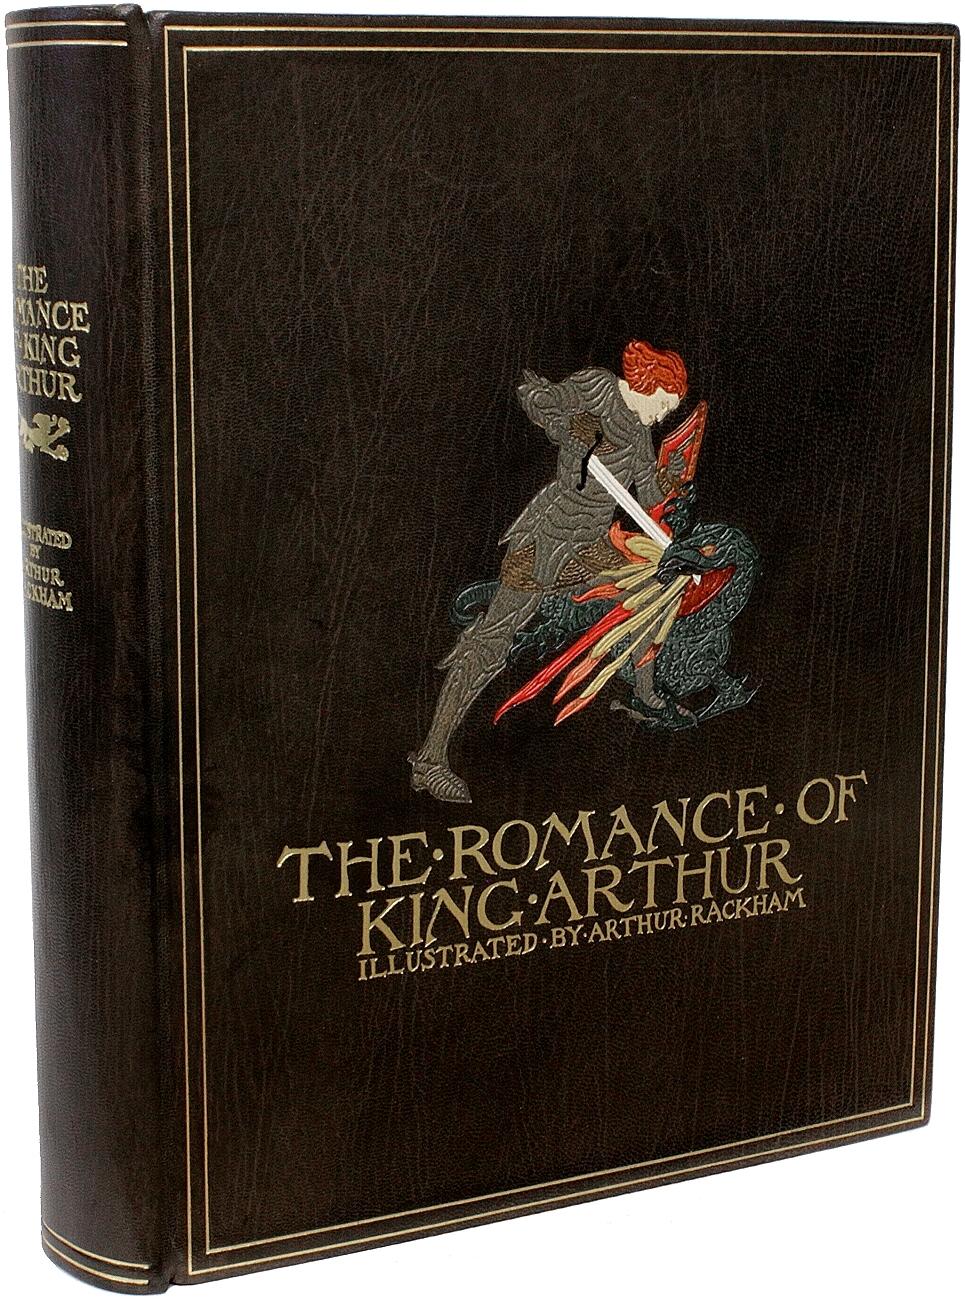 AUTHOR: MALORY, Thomas, (Arthur Rackham). 

TITLE: The Romance Of King Arthur And His Knights Of The Round Table.

PUBLISHER: London: Macmillan and Co., Ltd., 1917.

DESCRIPTION: SIGNED LIMITED EDITION. 1 vol., 11-3/8